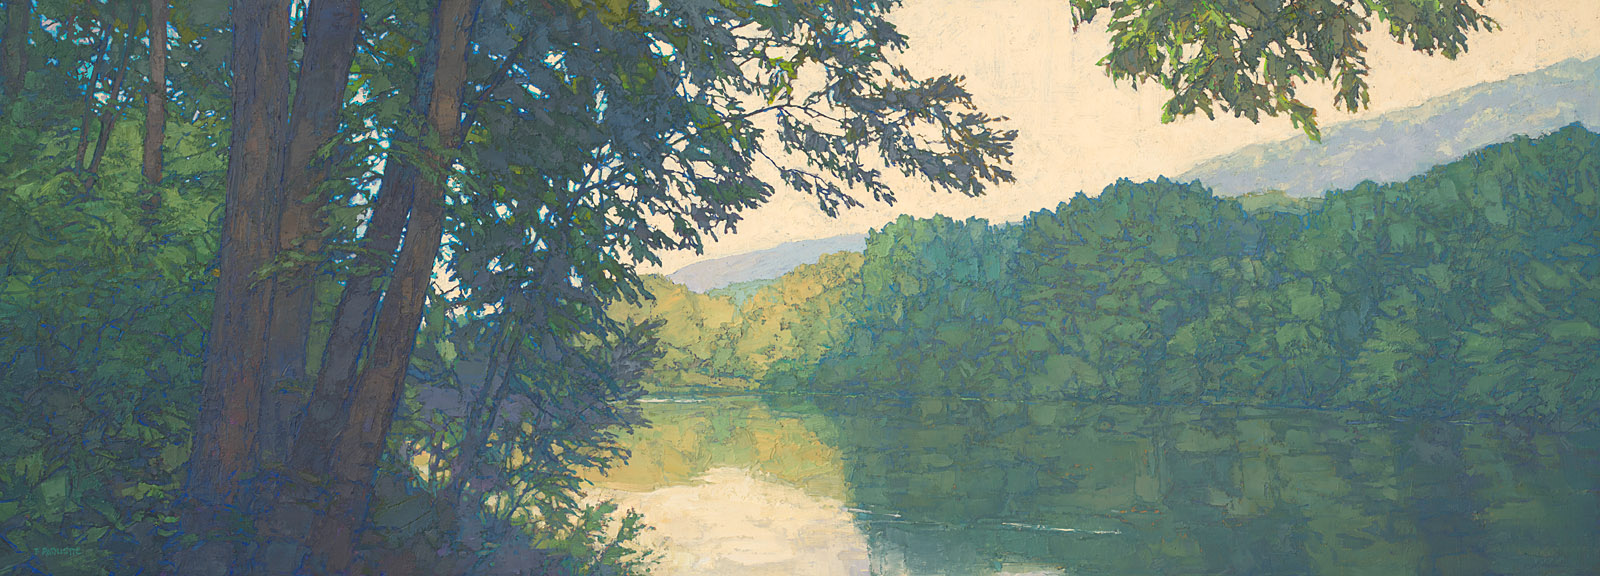 contemporary landscape oil painting of Allegheny Islands wilderness area in Pennsylvania